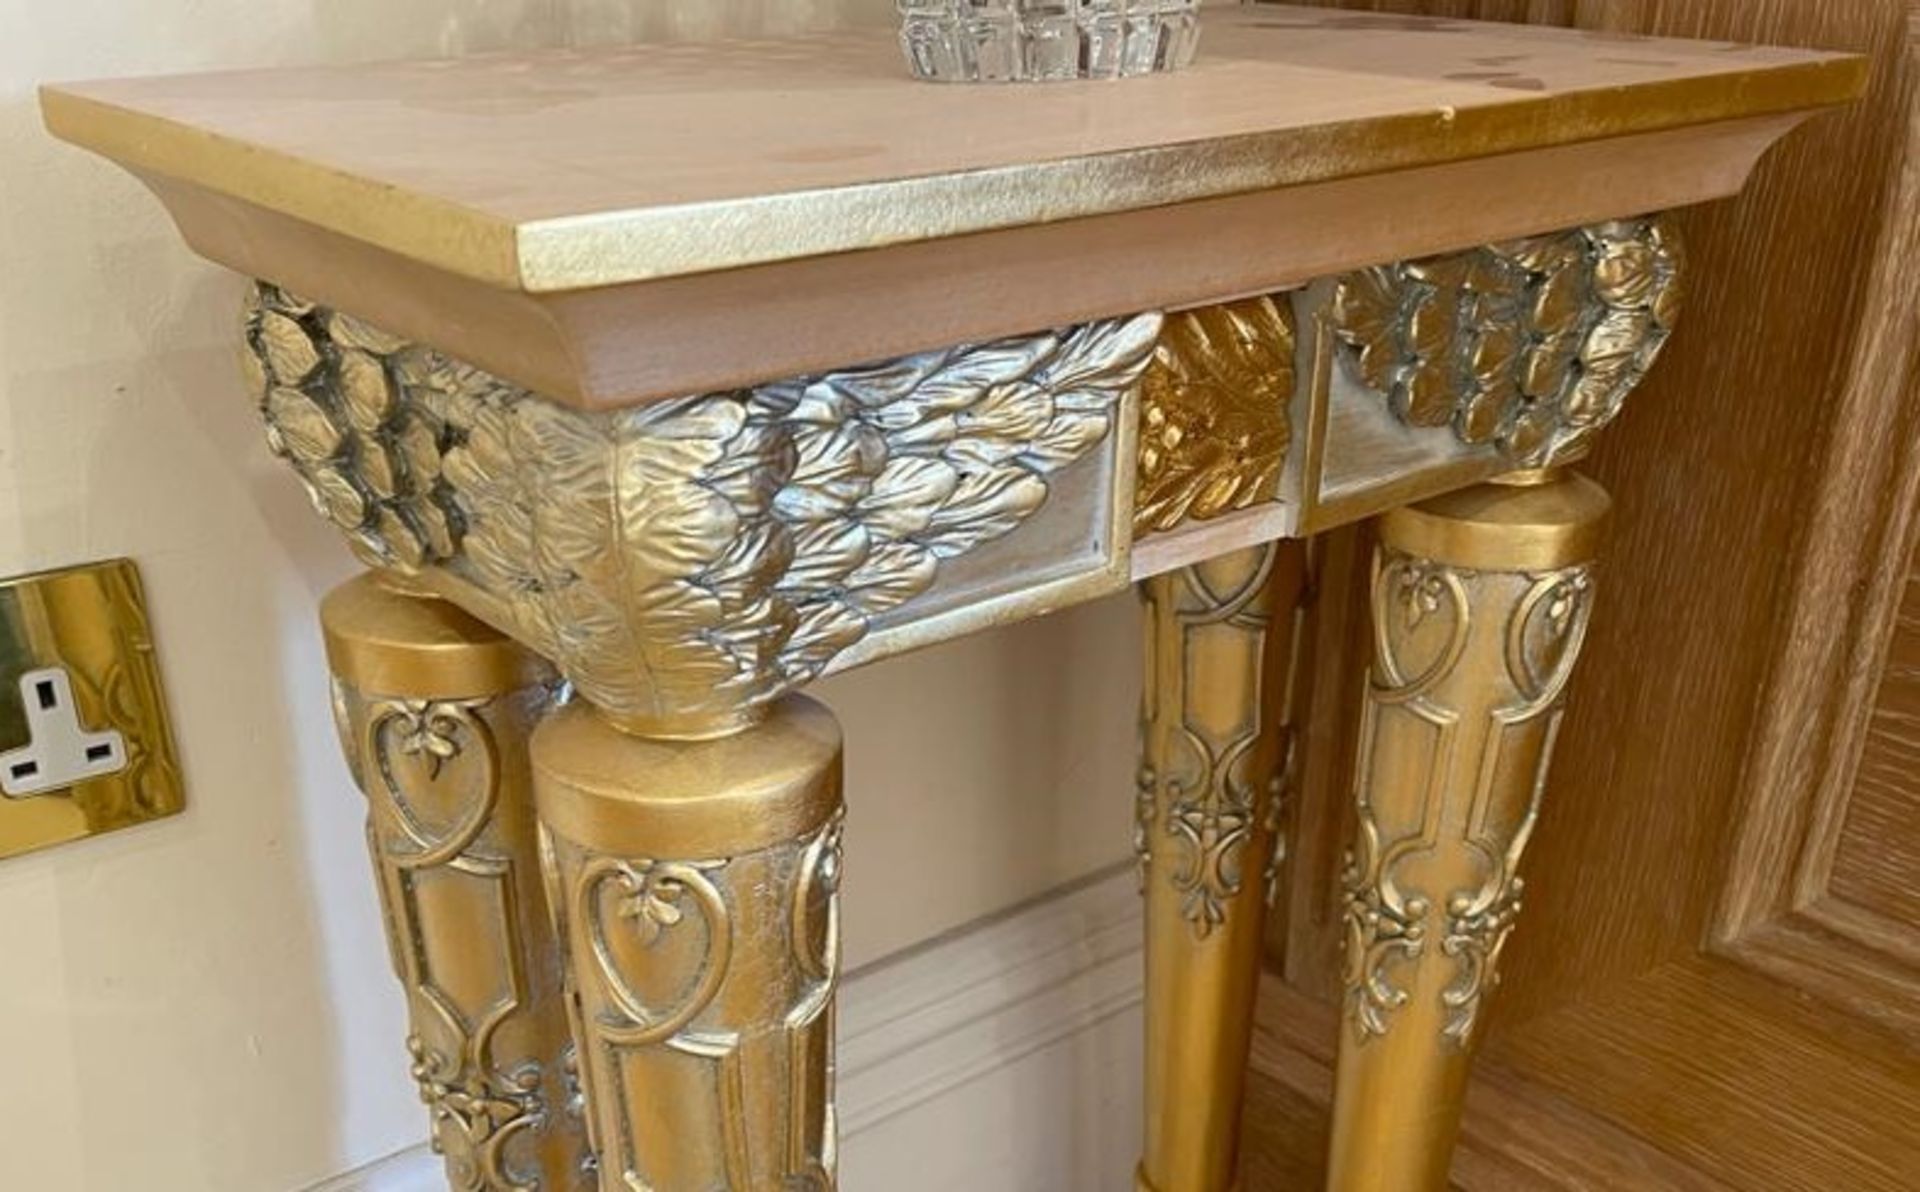 1 x Hand Carved Ornate Lamp Tables Complimented With Birchwood Veneer, Golden Pillar Legs, Carved - Image 6 of 10